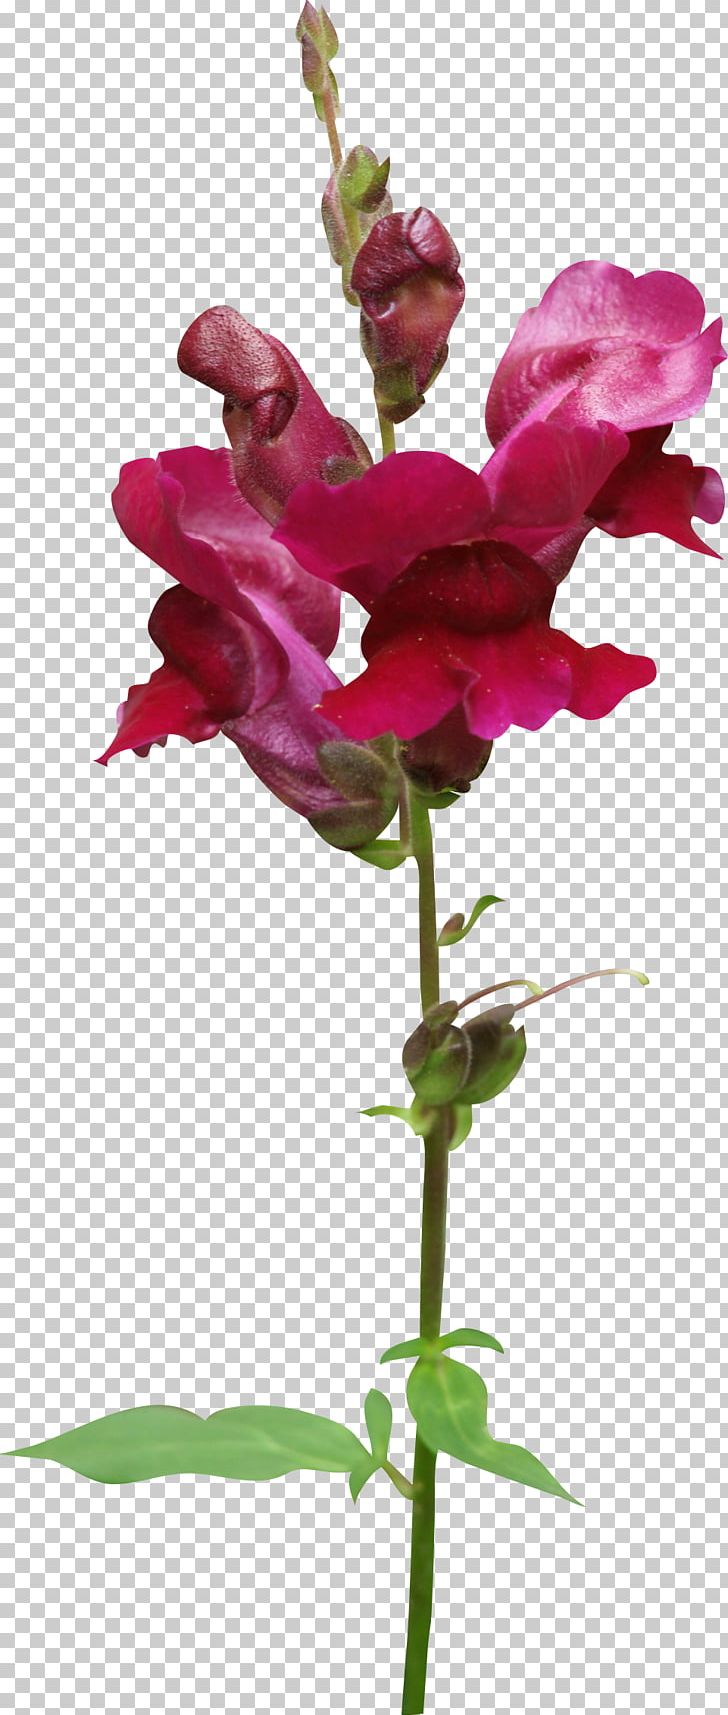 Cut Flowers Magenta Plant Purple PNG, Clipart, Cut Flowers, Flower, Flowering Plant, Herbaceous Plant, Magenta Free PNG Download